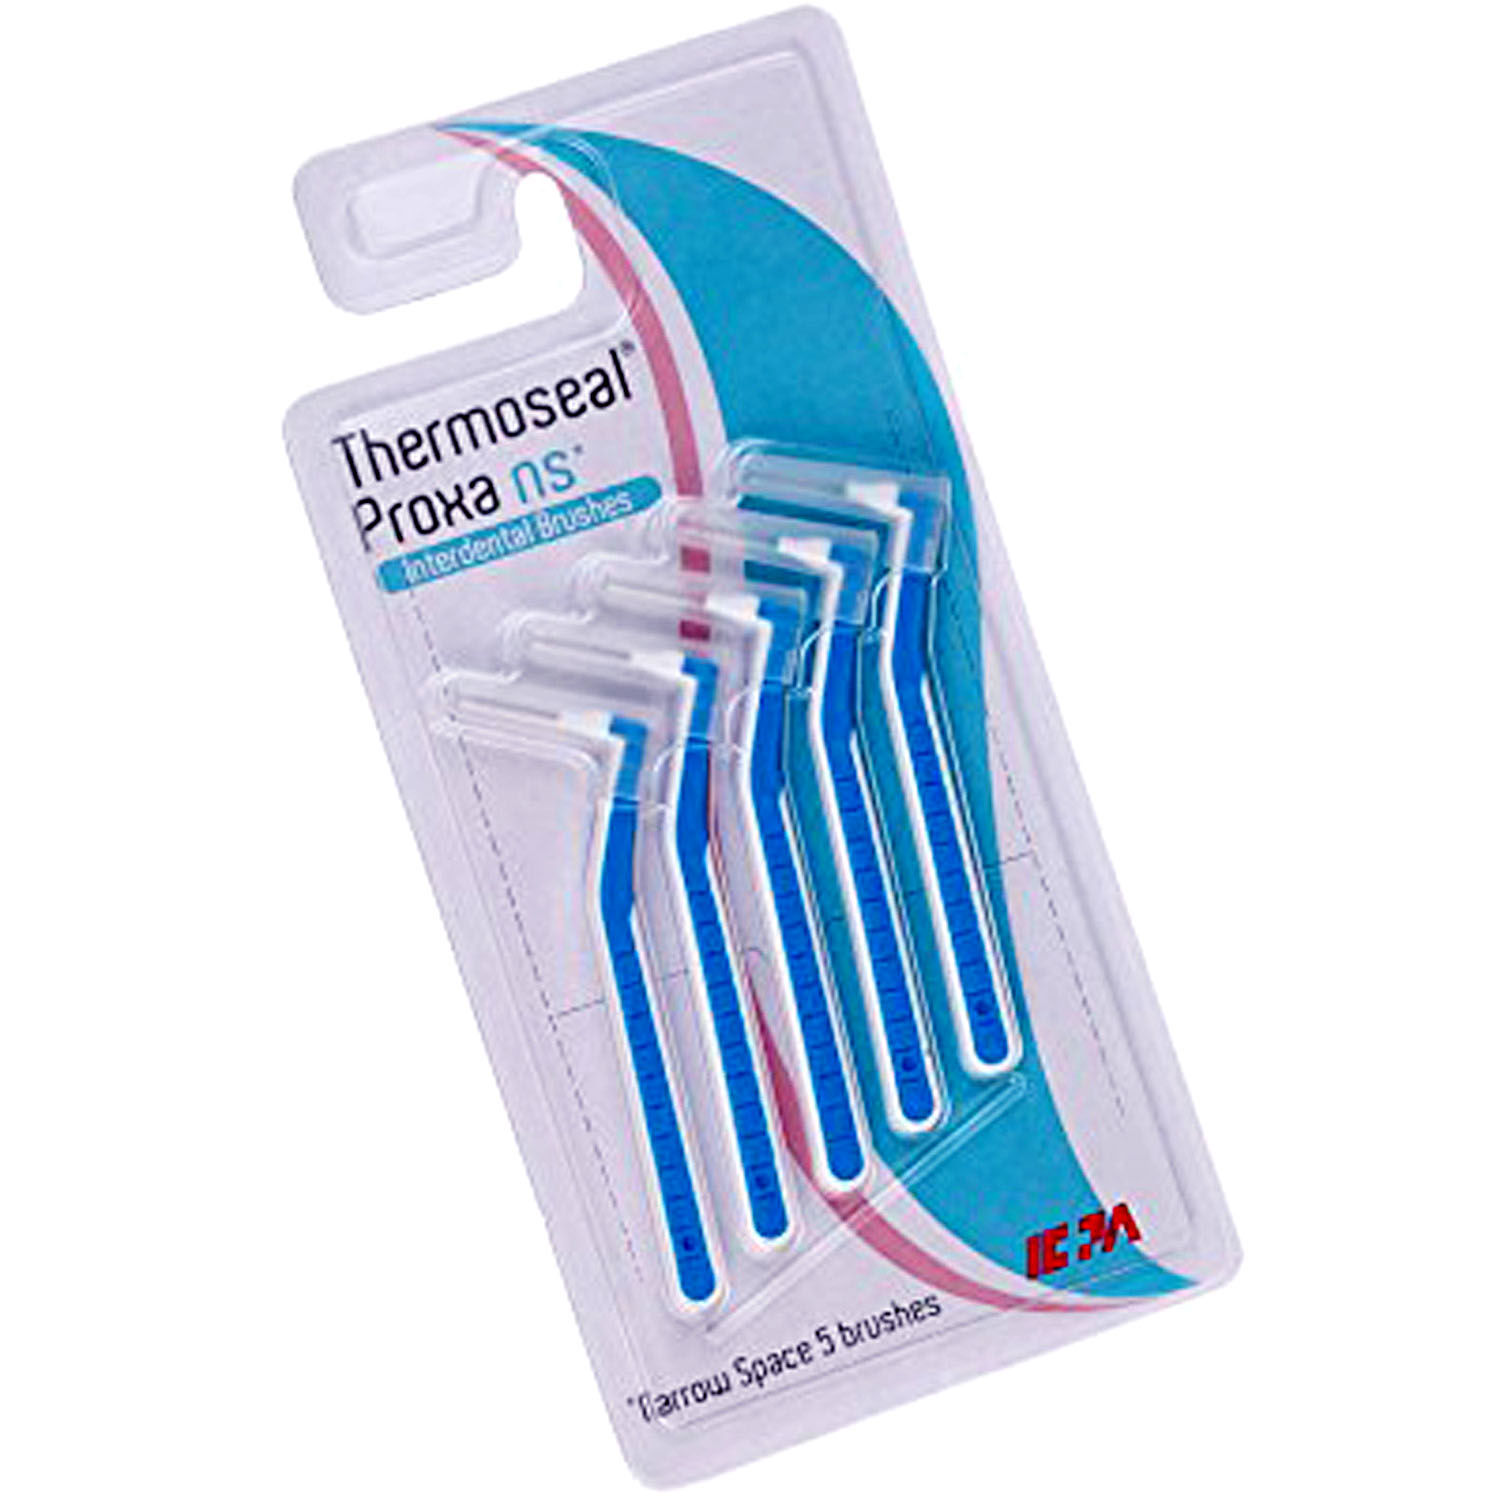 Buy Thermoseal Proxa Naroow Space Interdental Brushes, 5 Count Online